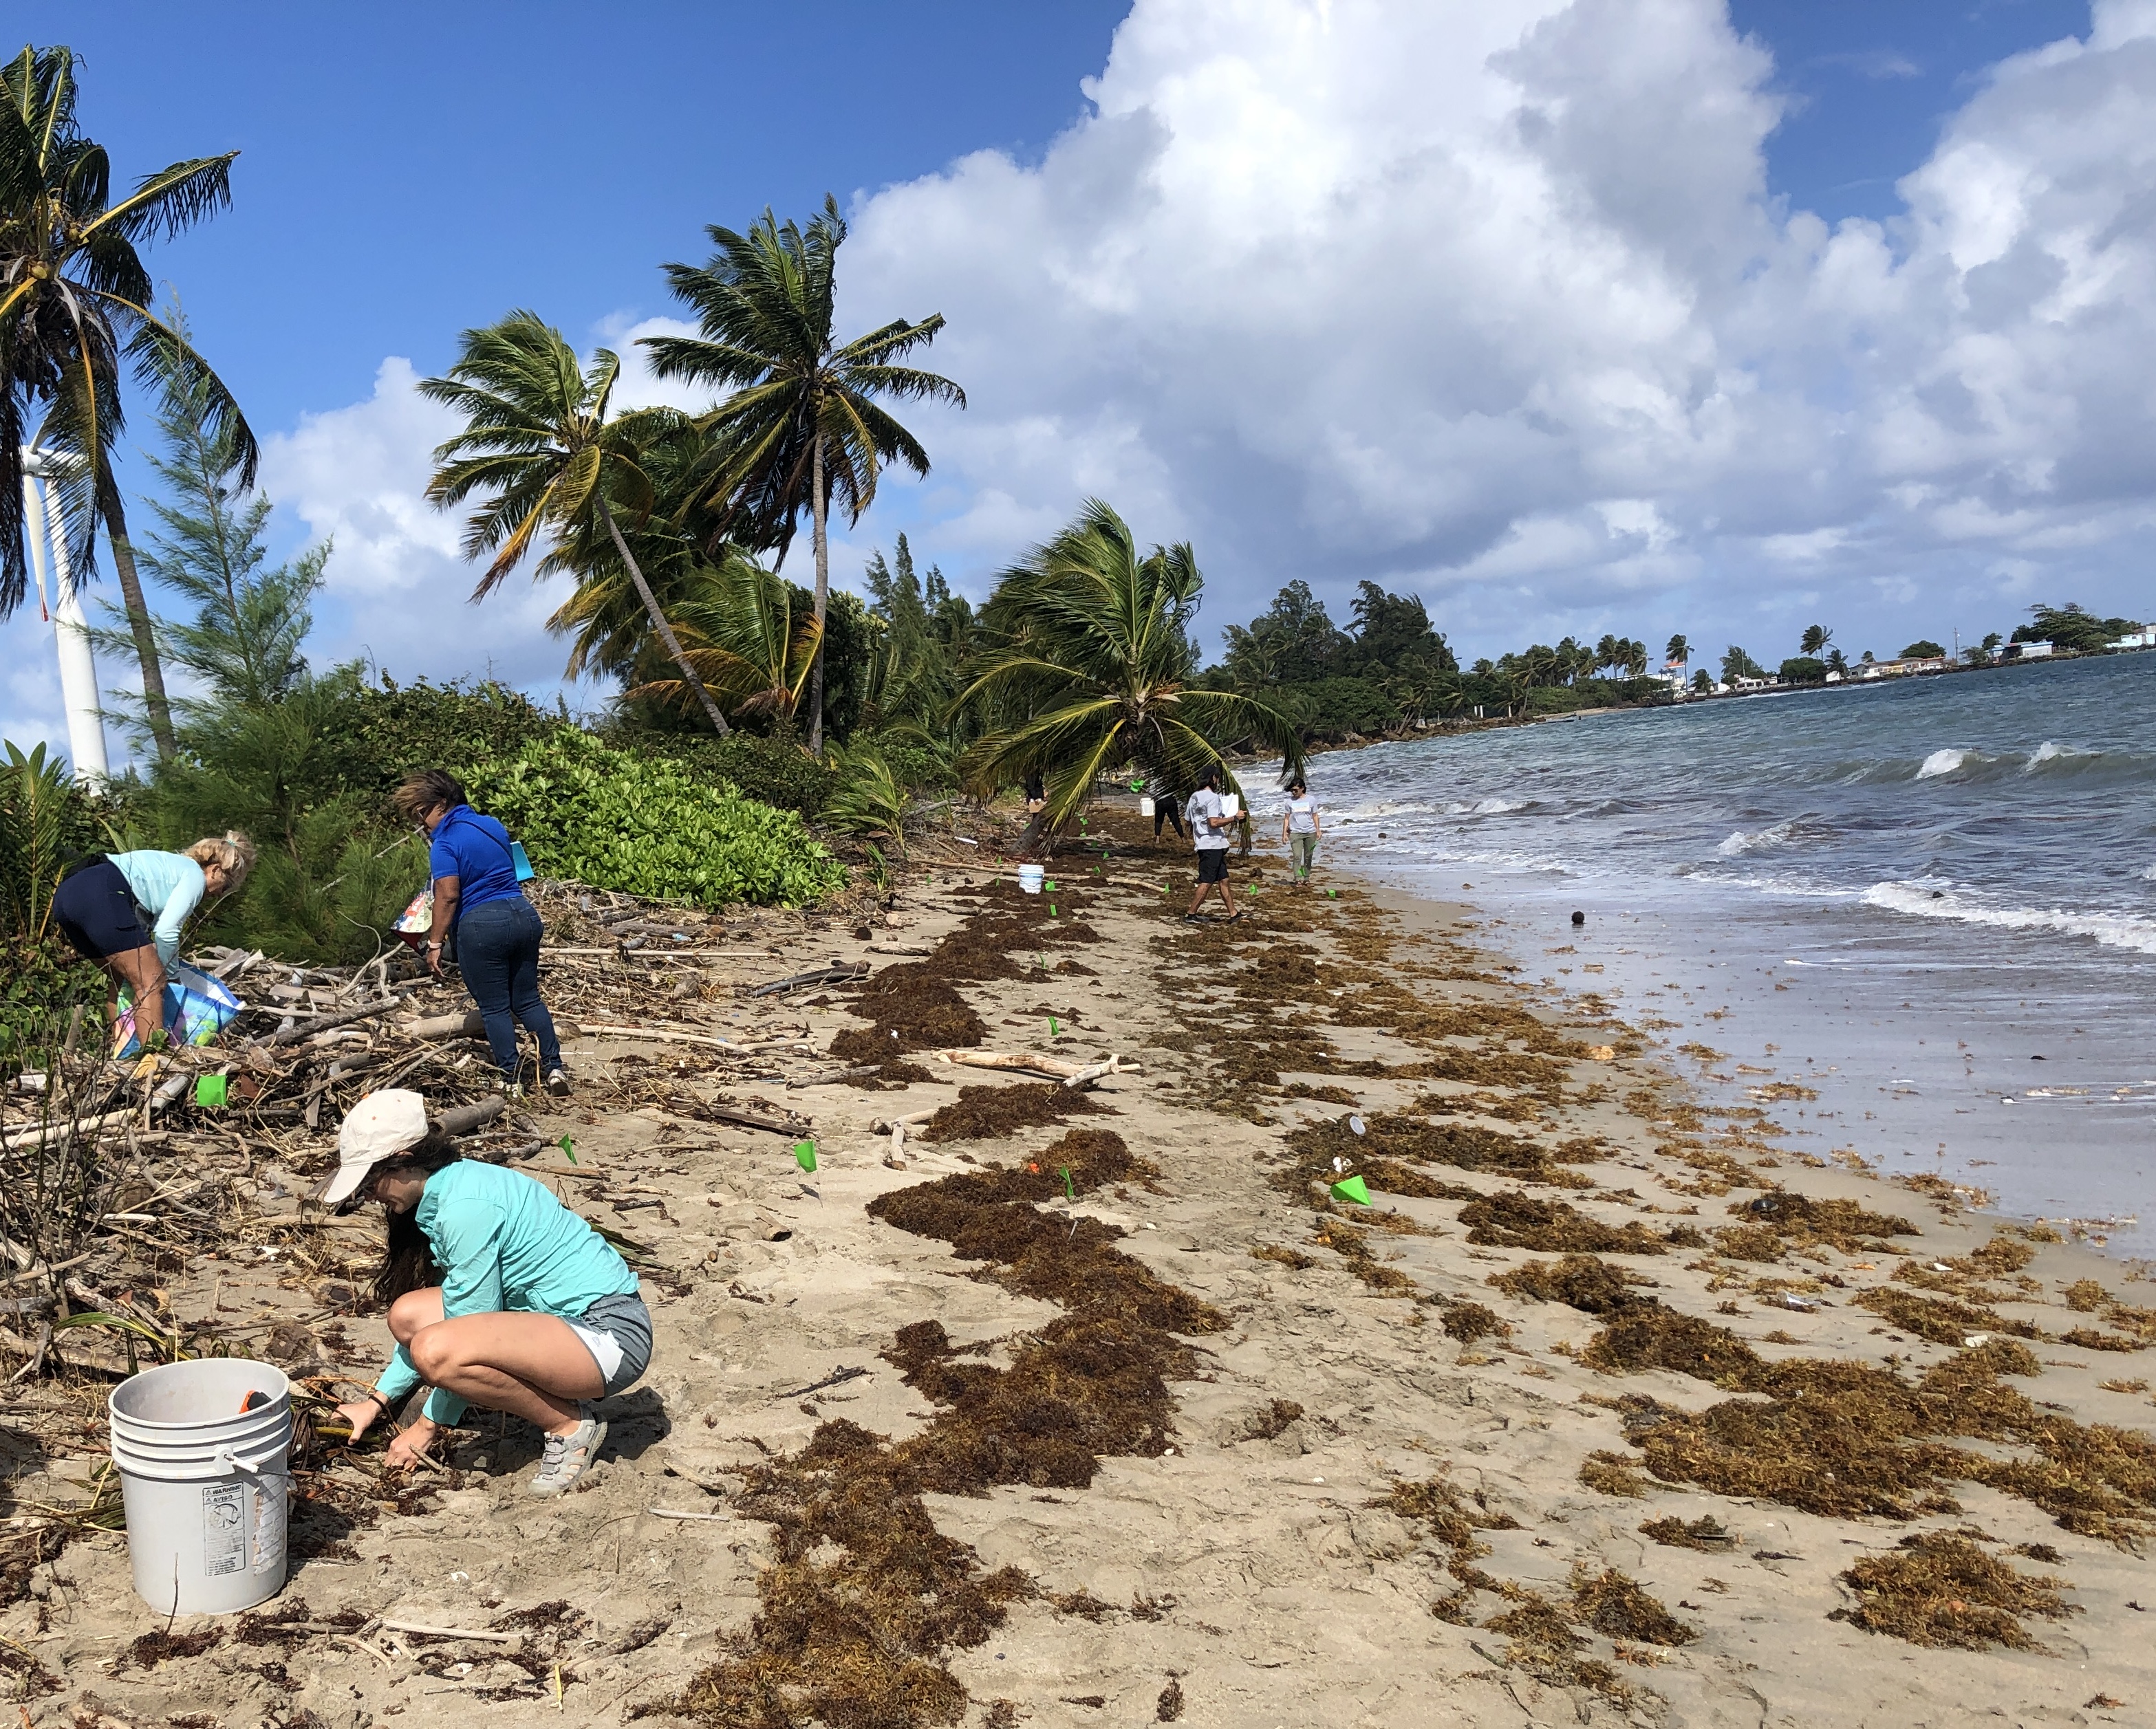 Volunteers collecting marine debris along a shoreline lined with palm trees.